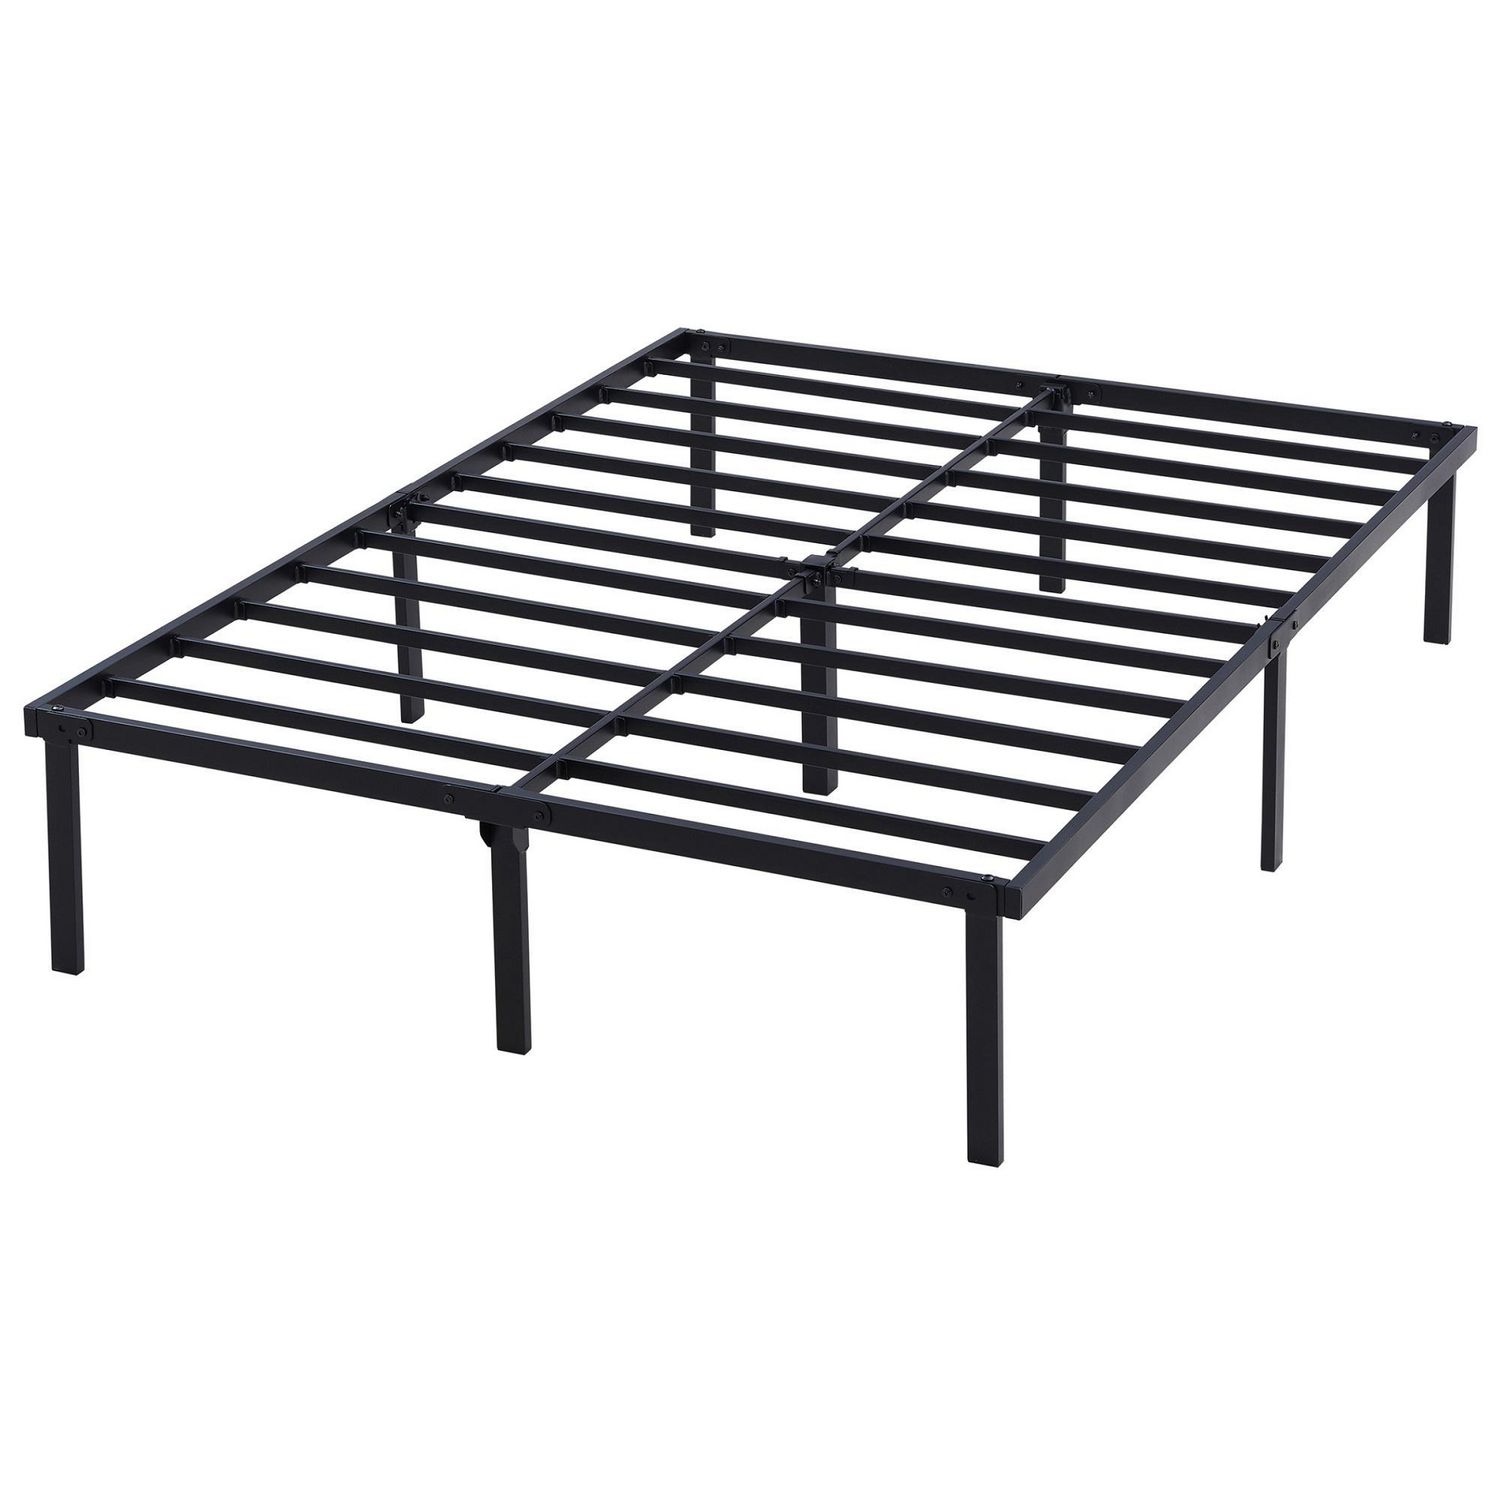 Mainstays 14 Heavy Duty Slat Bed Frame, How To Stabilize A Metal Bed Frame